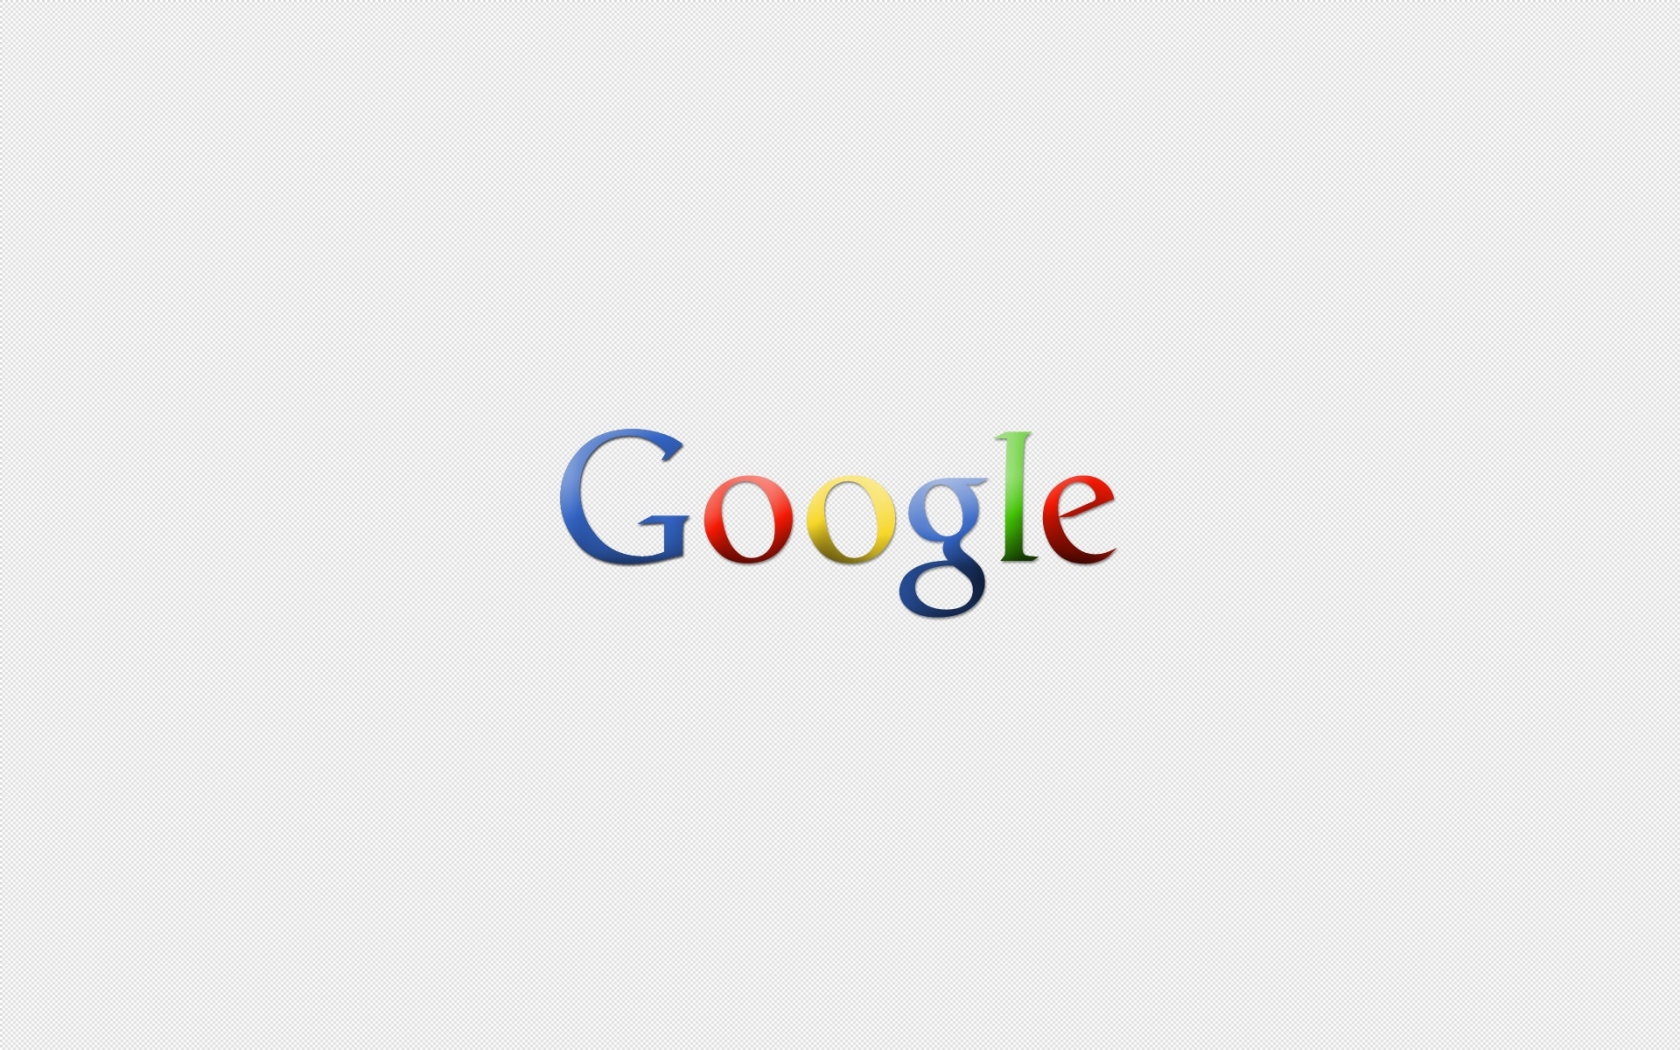 Google Search Wallpaper And Image